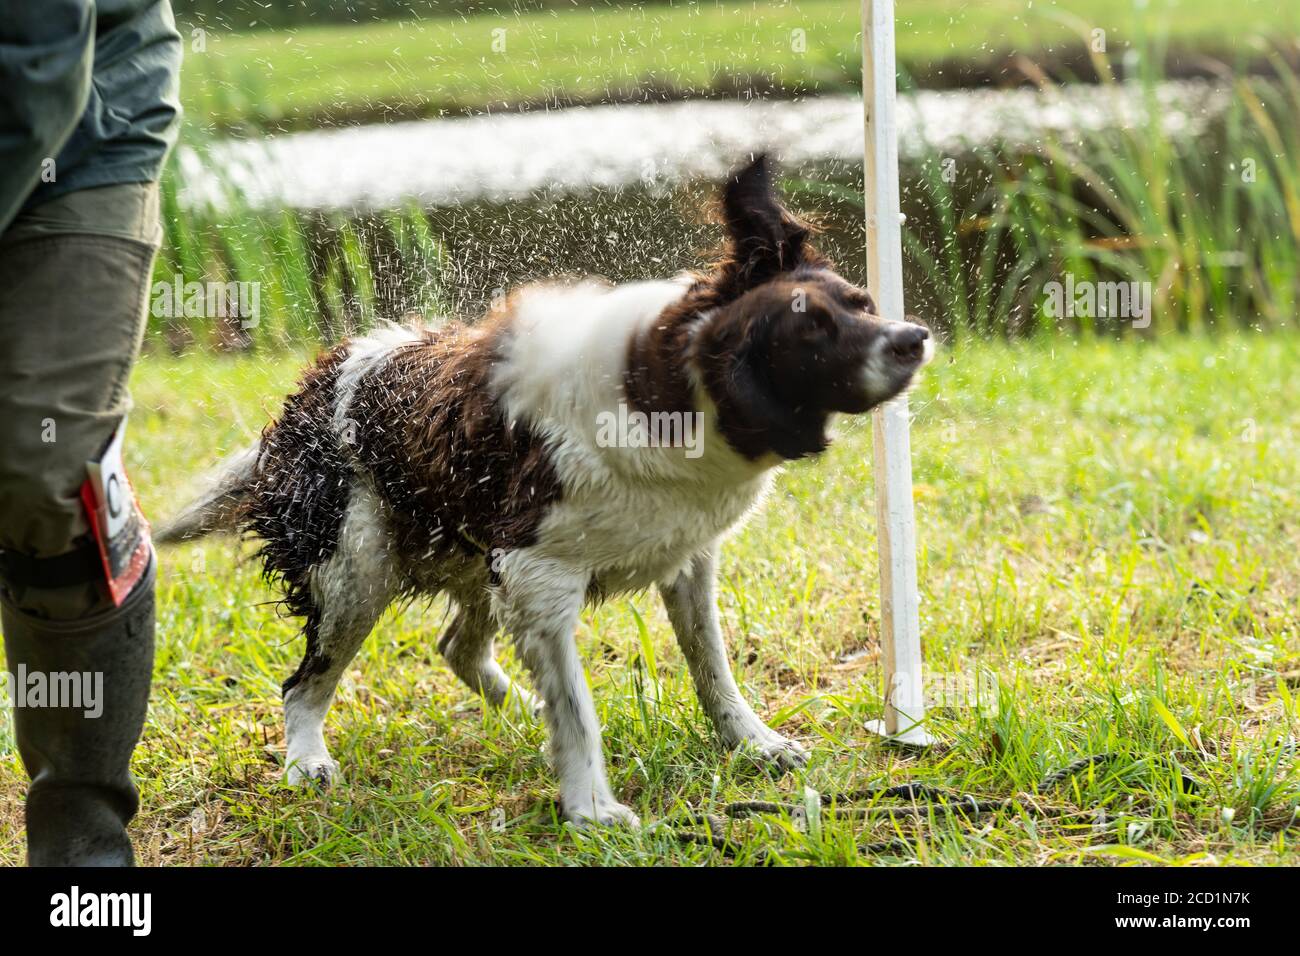 Dutch Partridge Dog Drentse Patrijs Hond Shaking To Get Rid Of Water In His Fur With Water Splashing Everywhere In The Sunlight Stock Photo Alamy